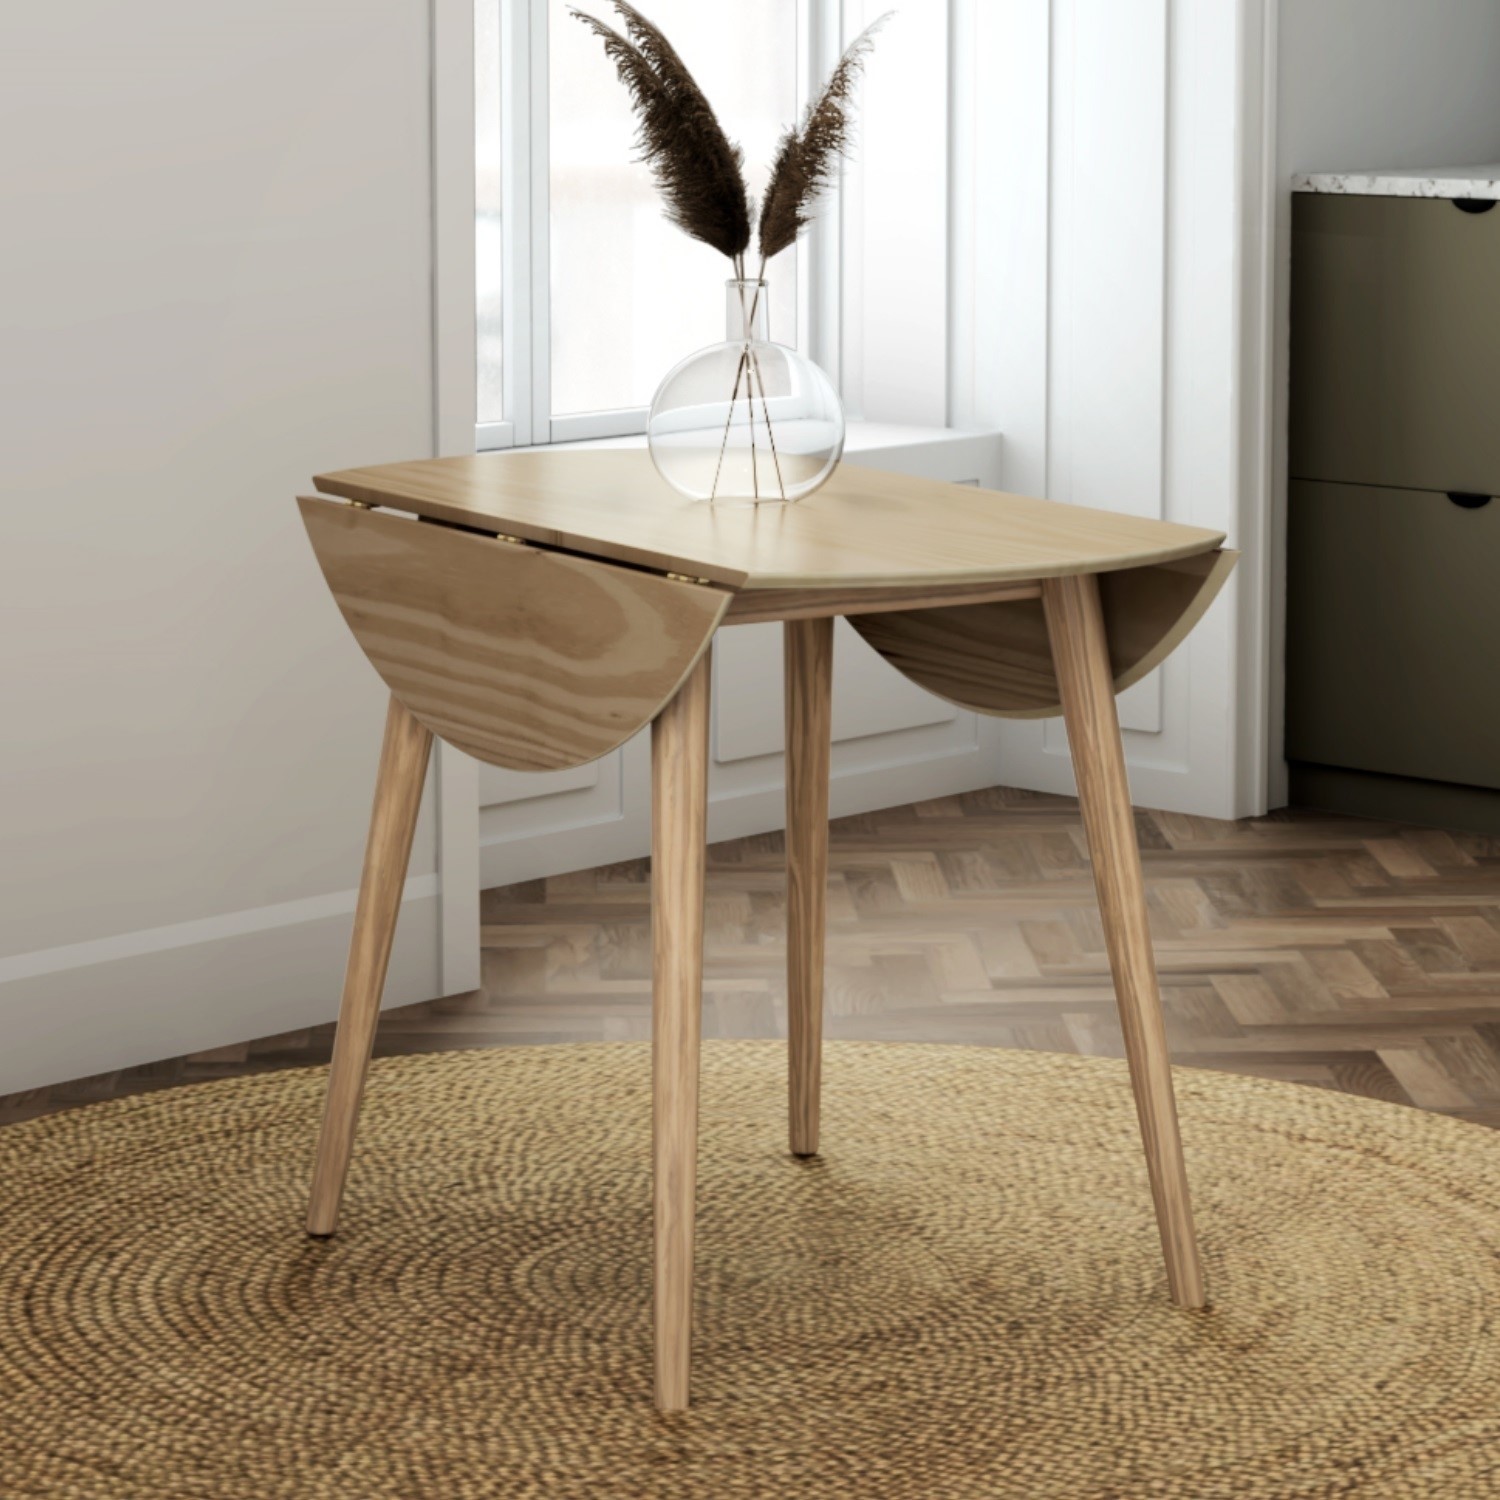 Ola Details about   Round Drop Leaf Oak Dining Table Seats 4 